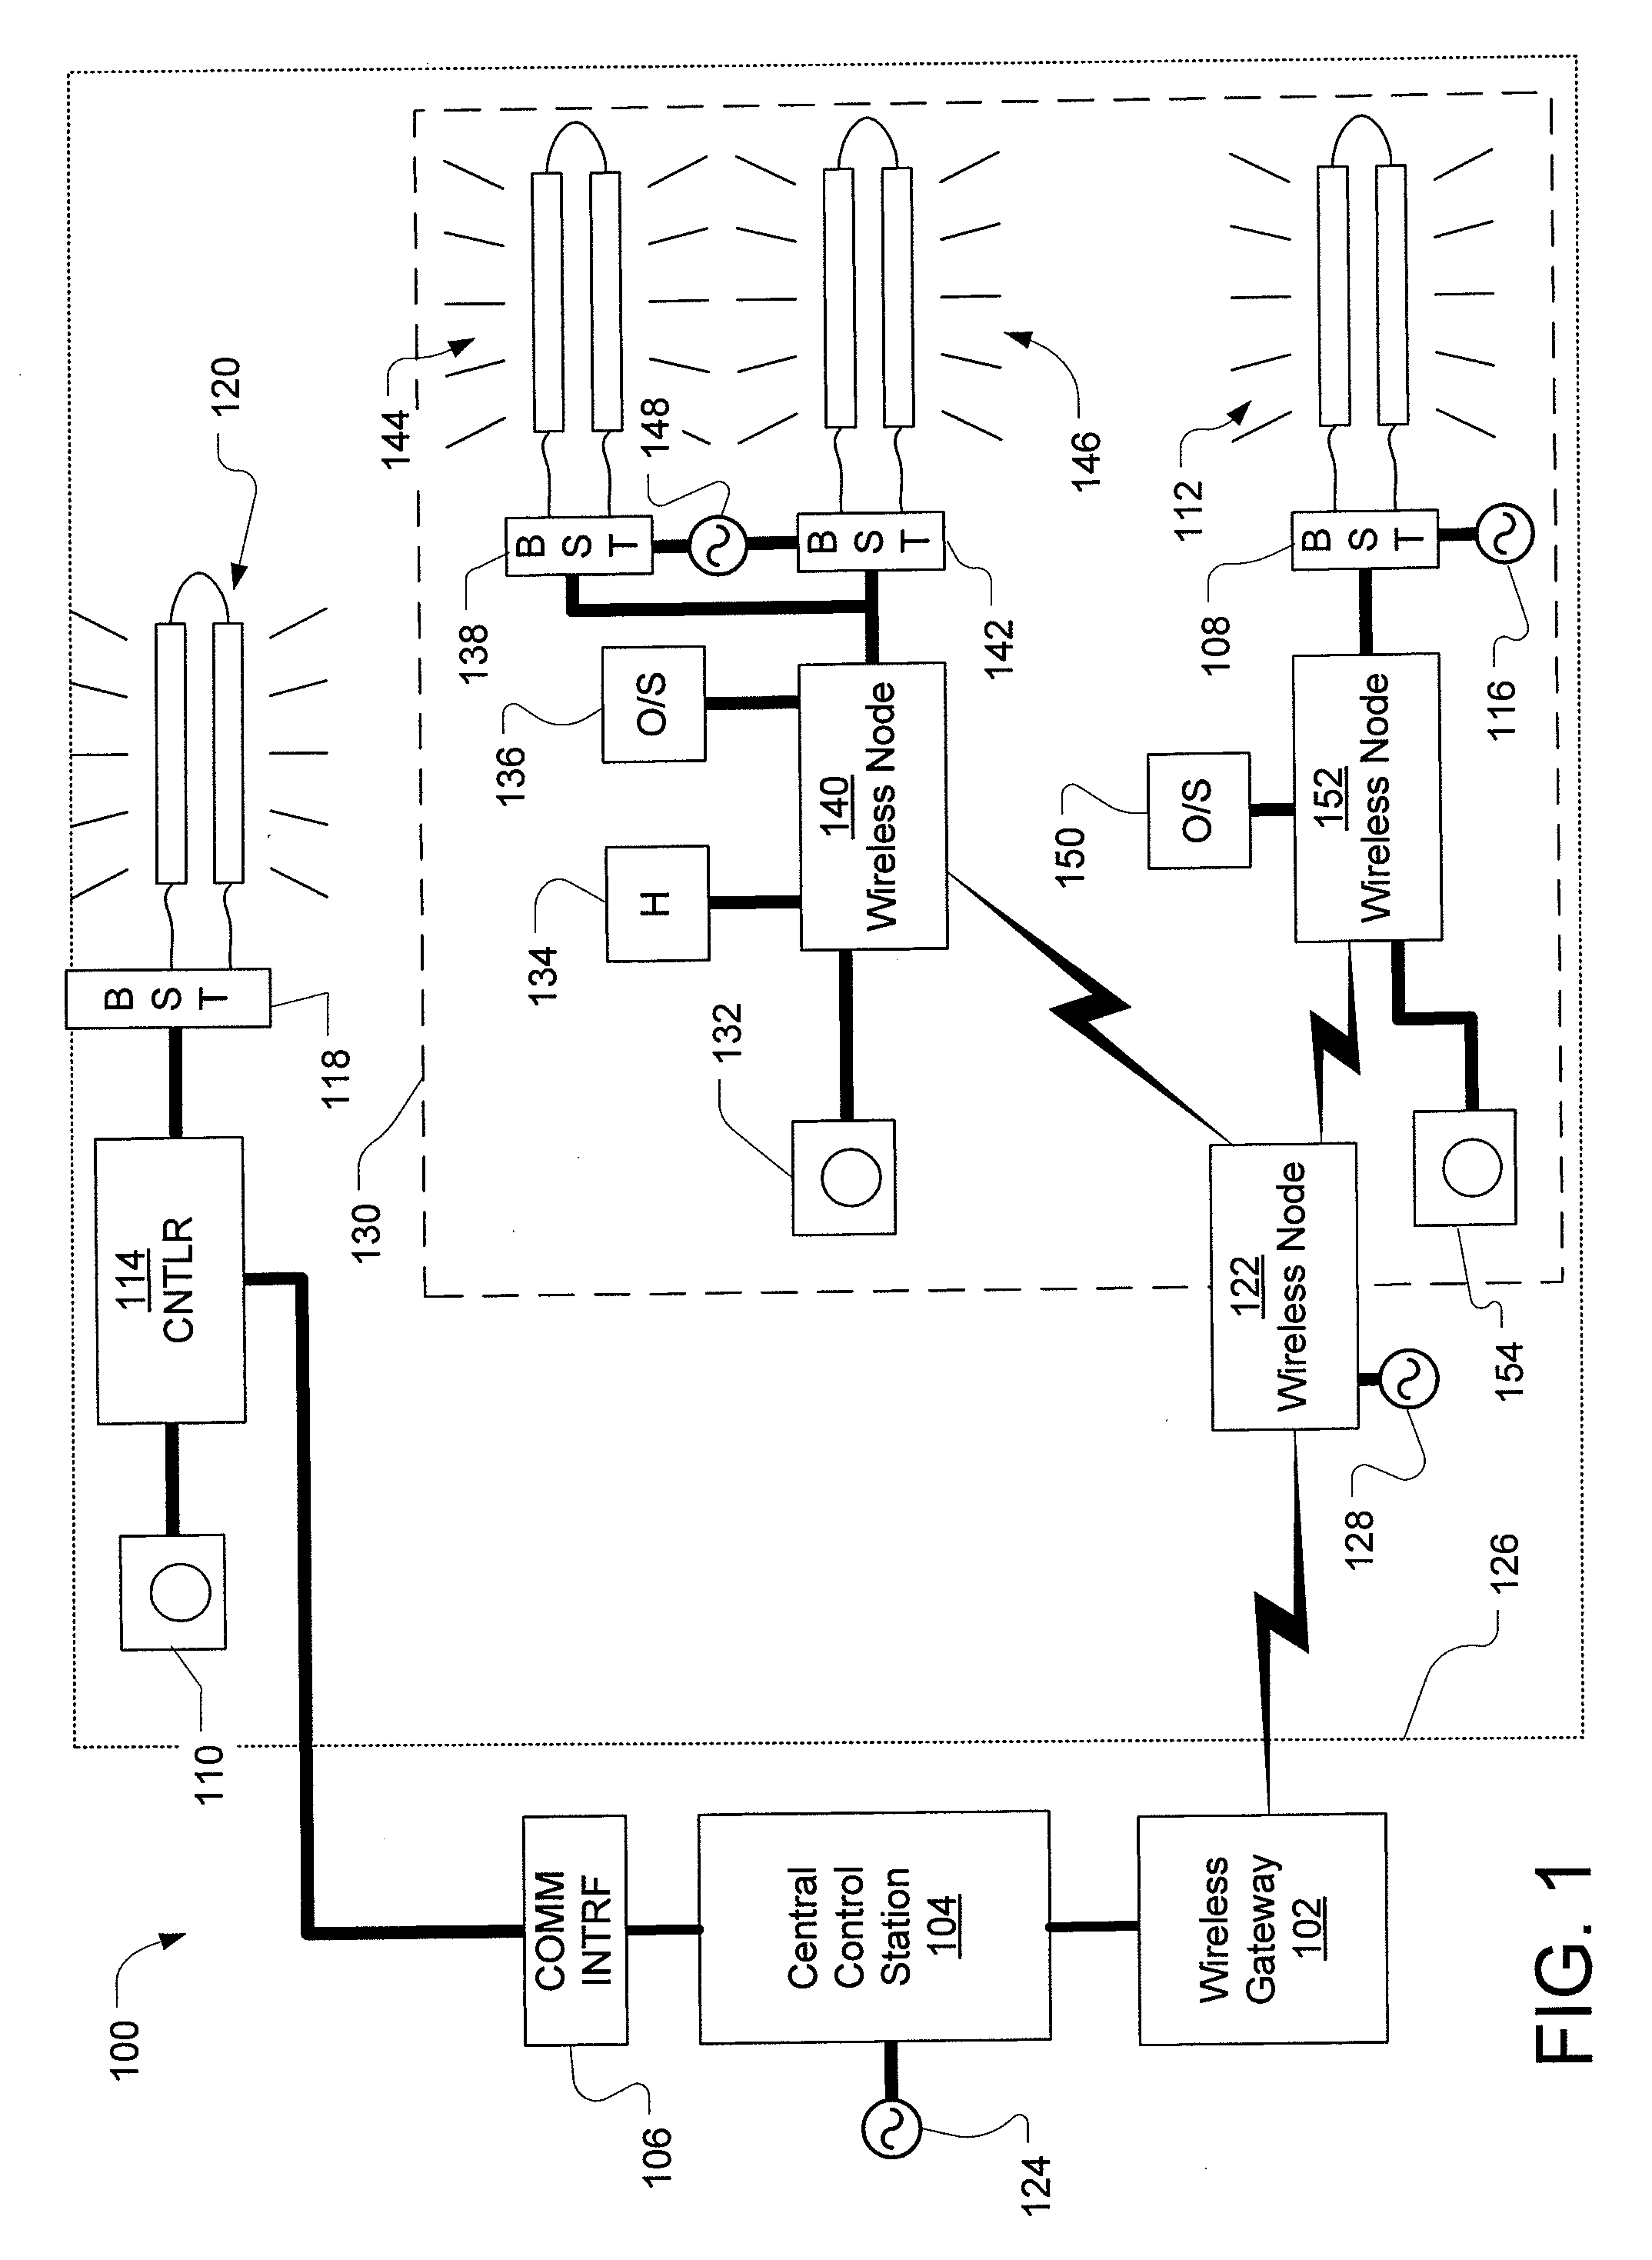 Method and system for a network of wireless ballast-powered controllers